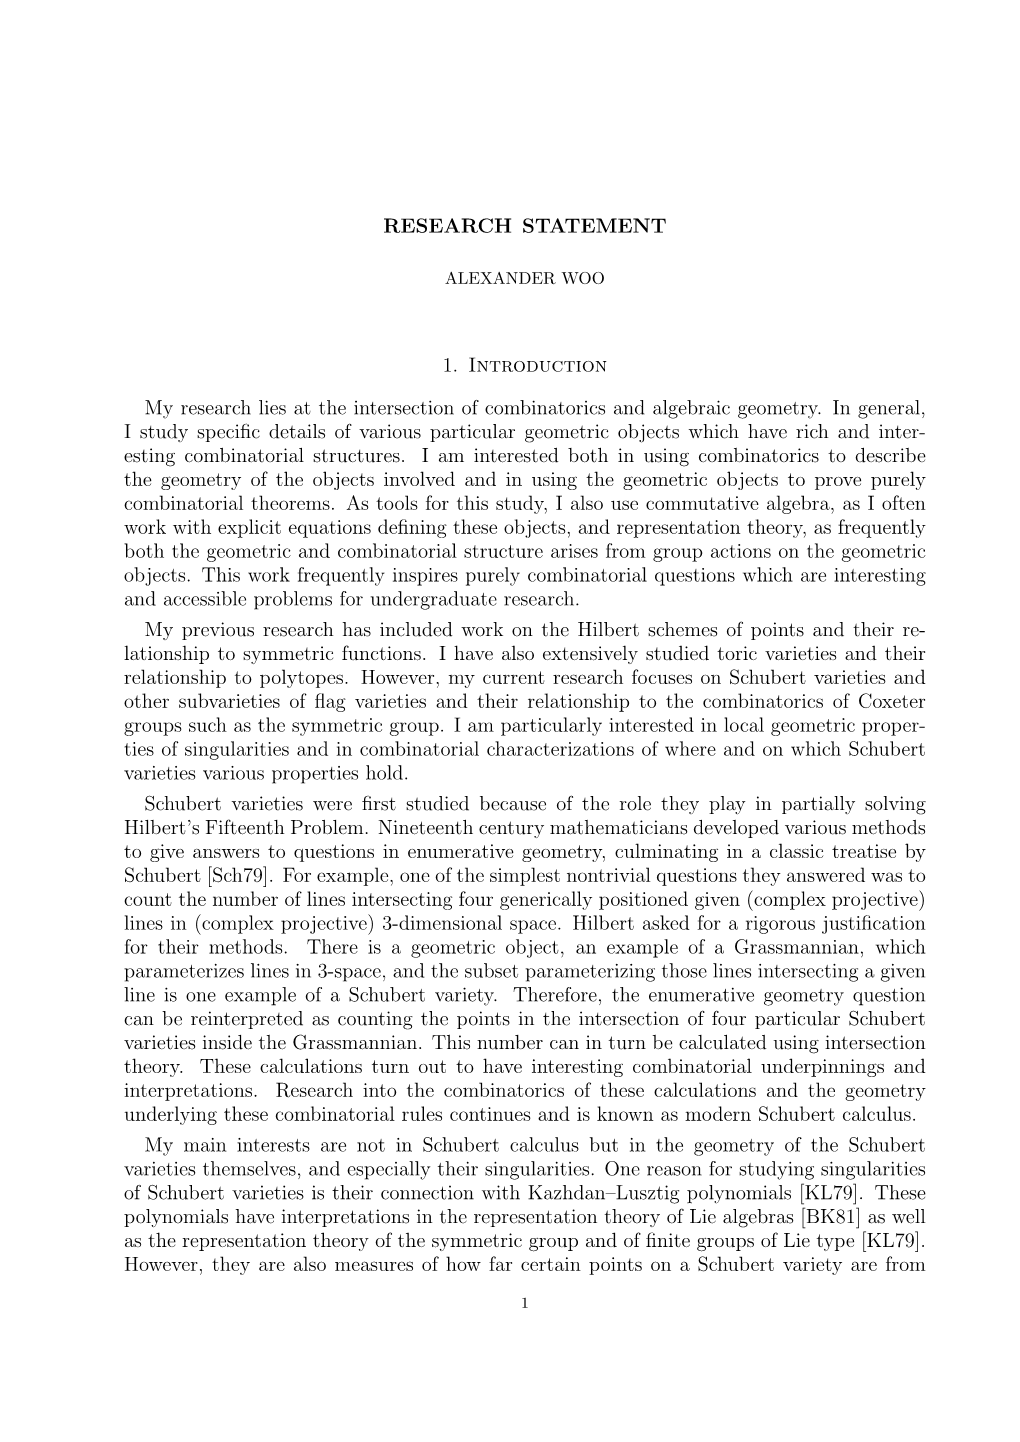 RESEARCH STATEMENT 1. Introduction My Research Lies at the Intersection of Combinatorics and Algebraic Geometry. in General